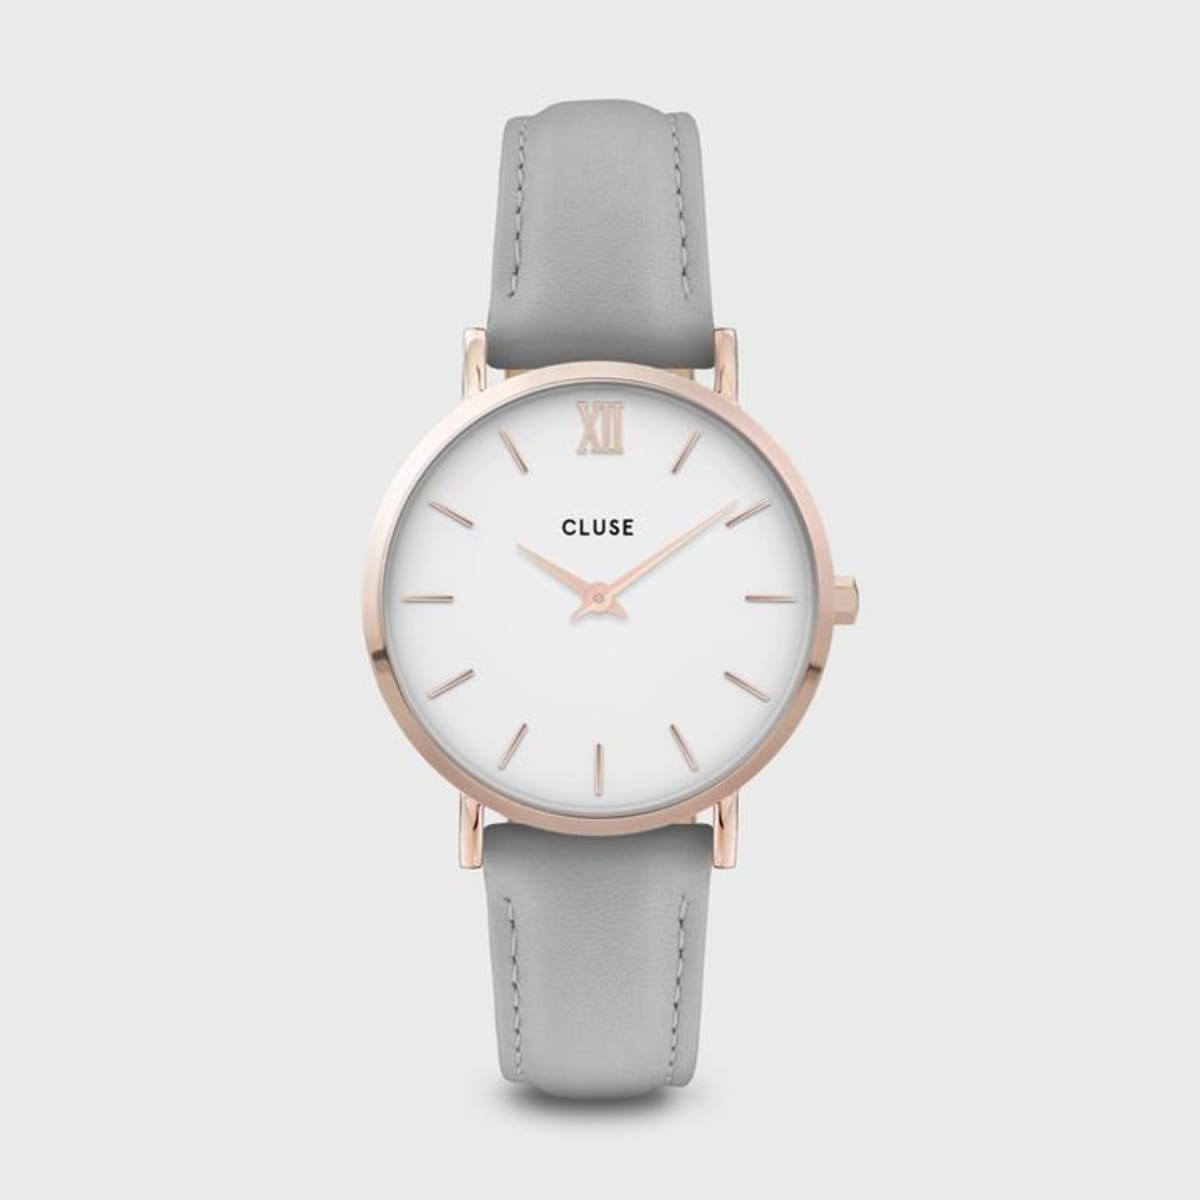 Dusky grey. Rose gold for dawn. A beautiful, minimal timepiece in signature CLUSE shades. The perfect accessory either side of midnight. Stylishly presented in a grey leatherette pouch. As with all our watches in the Minuit collection, you can easily customise this watch with any Minuit or La Roche Petite leather or mesh strap.